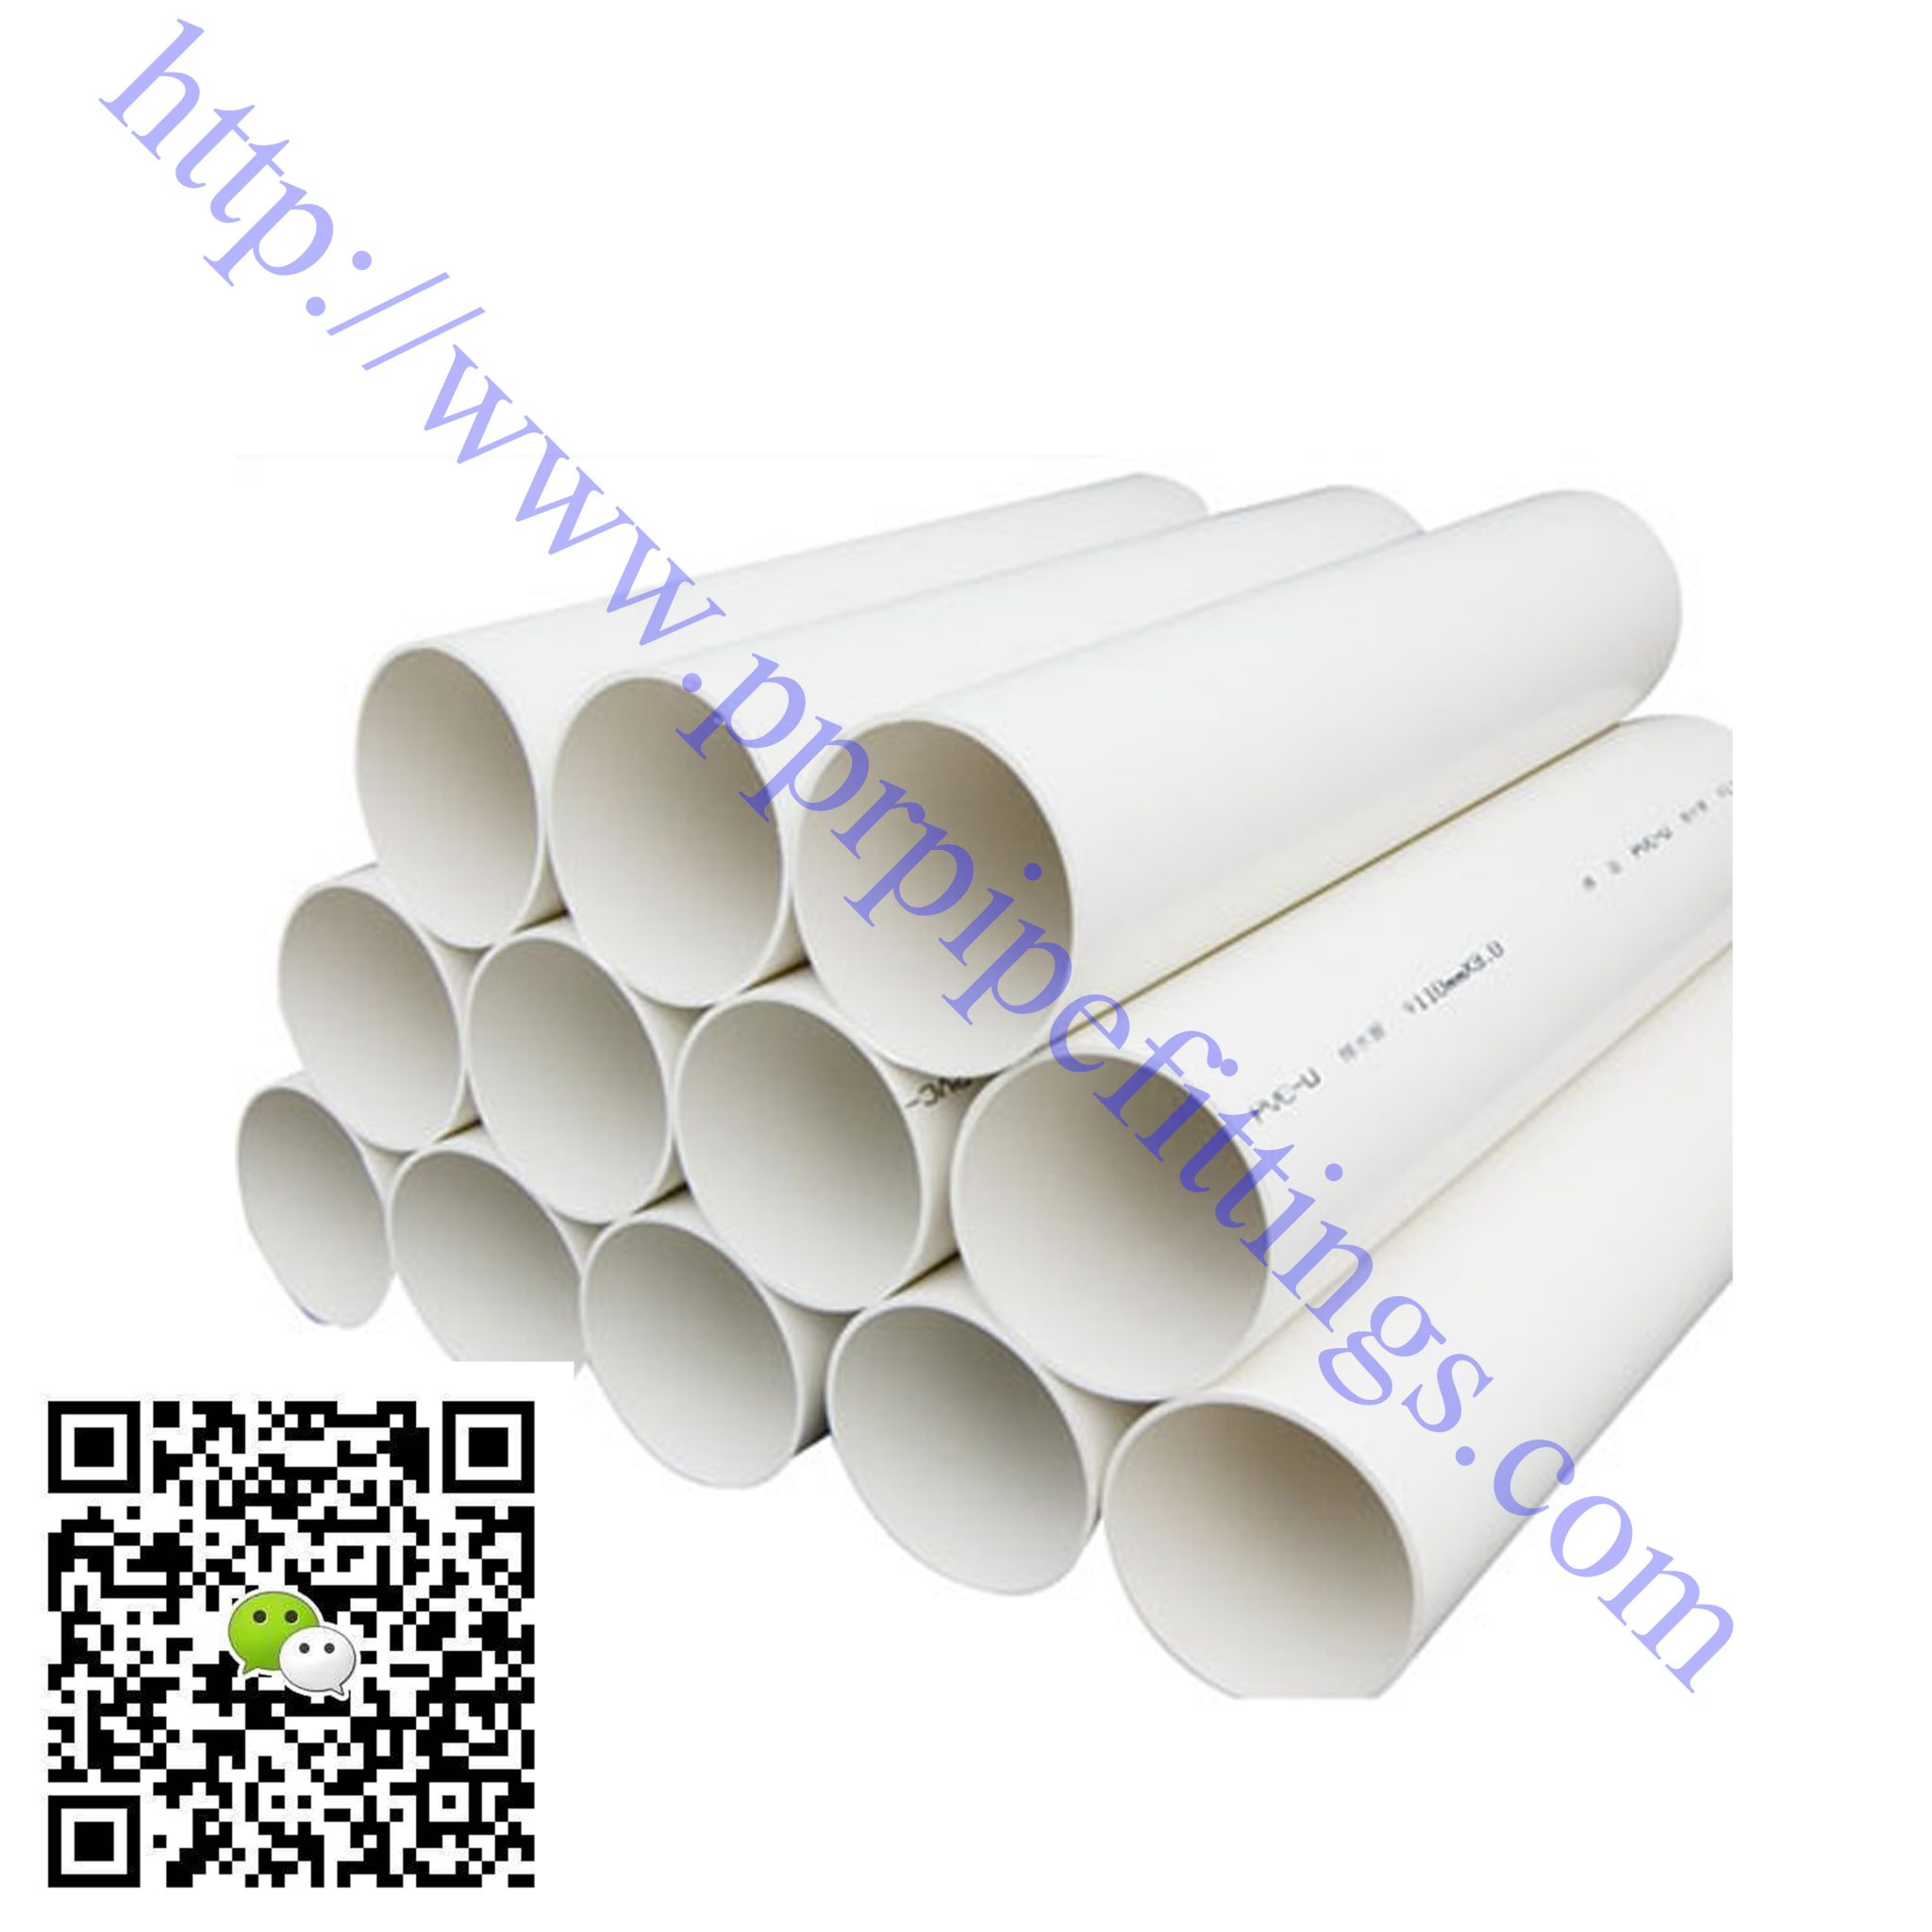 pvc-u pipe fittings, upvc pipes for drainage